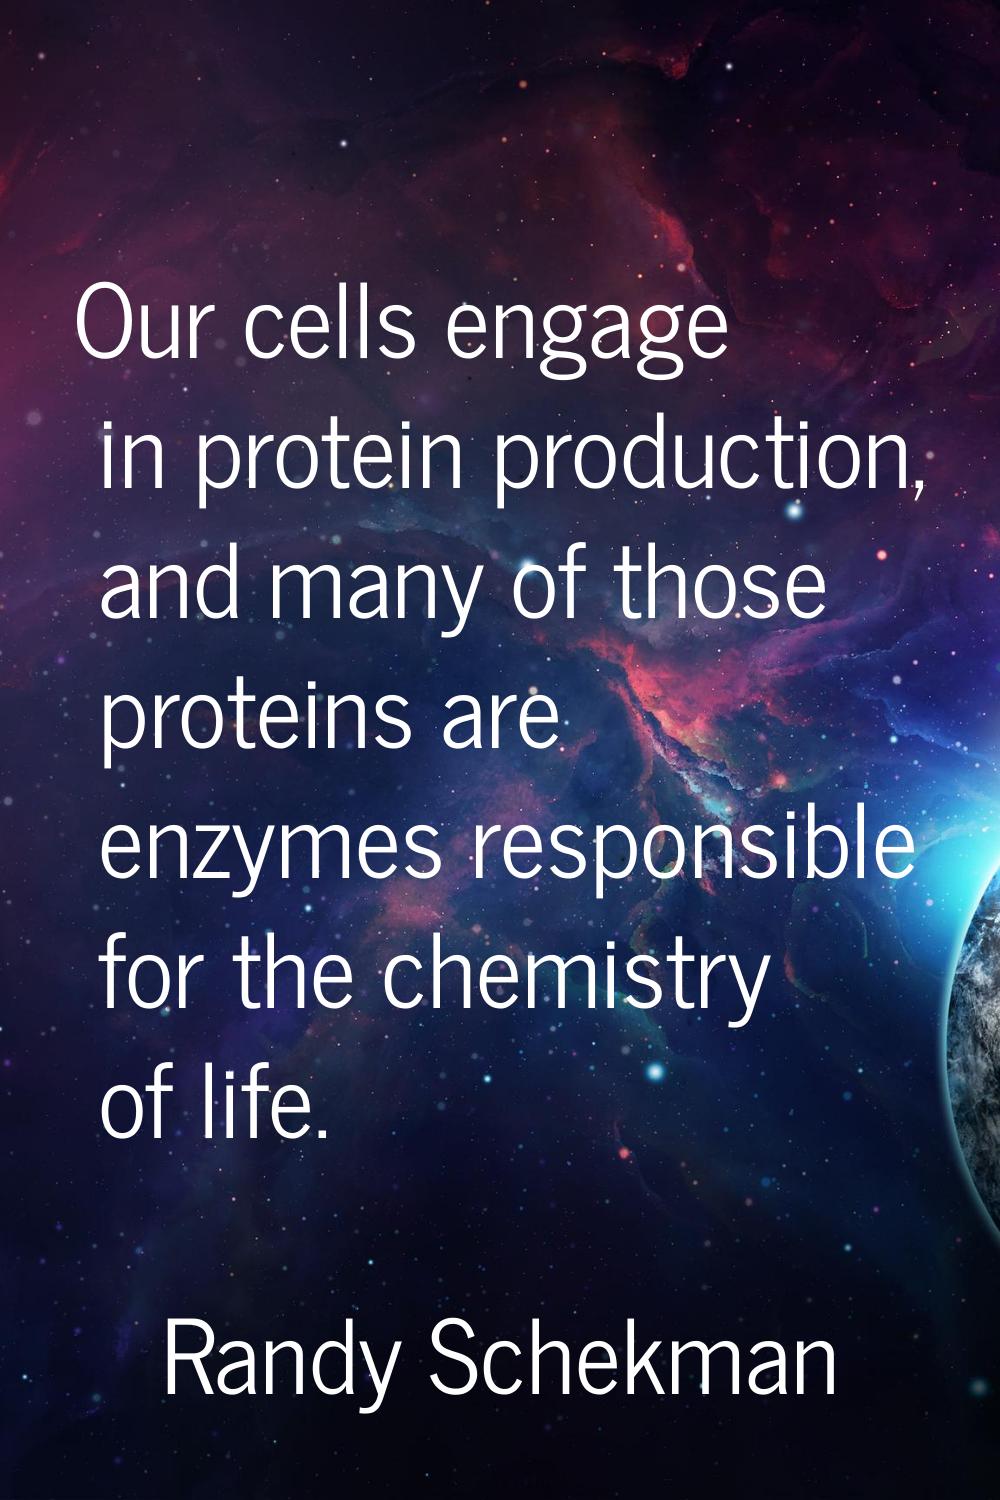 Our cells engage in protein production, and many of those proteins are enzymes responsible for the 